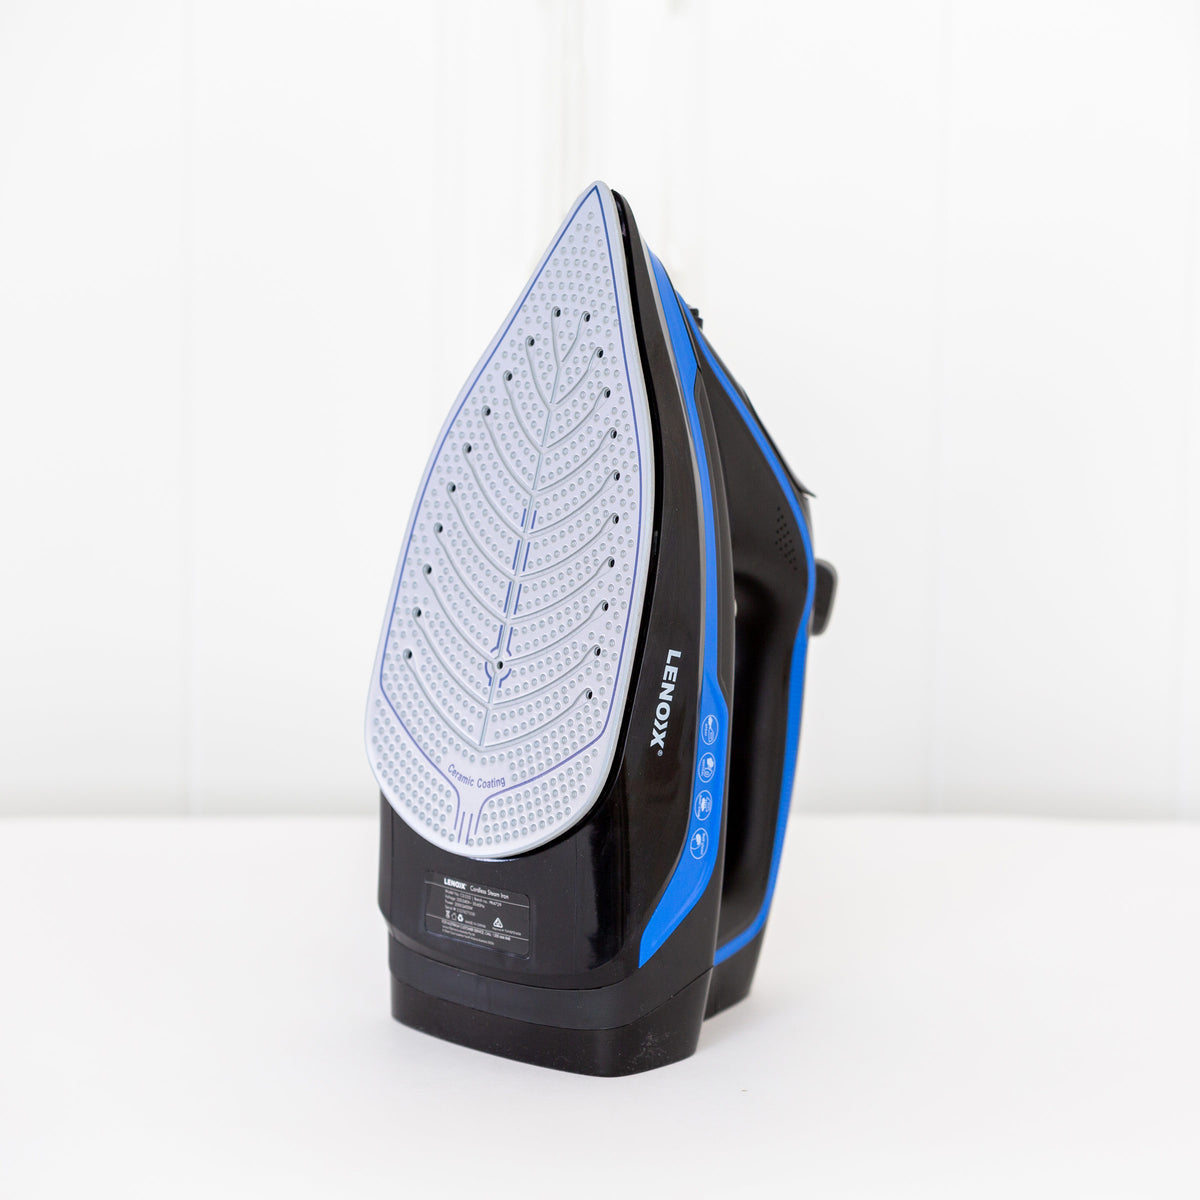 Cordless Steam Iron with ceramic soleplate for easy gliding.